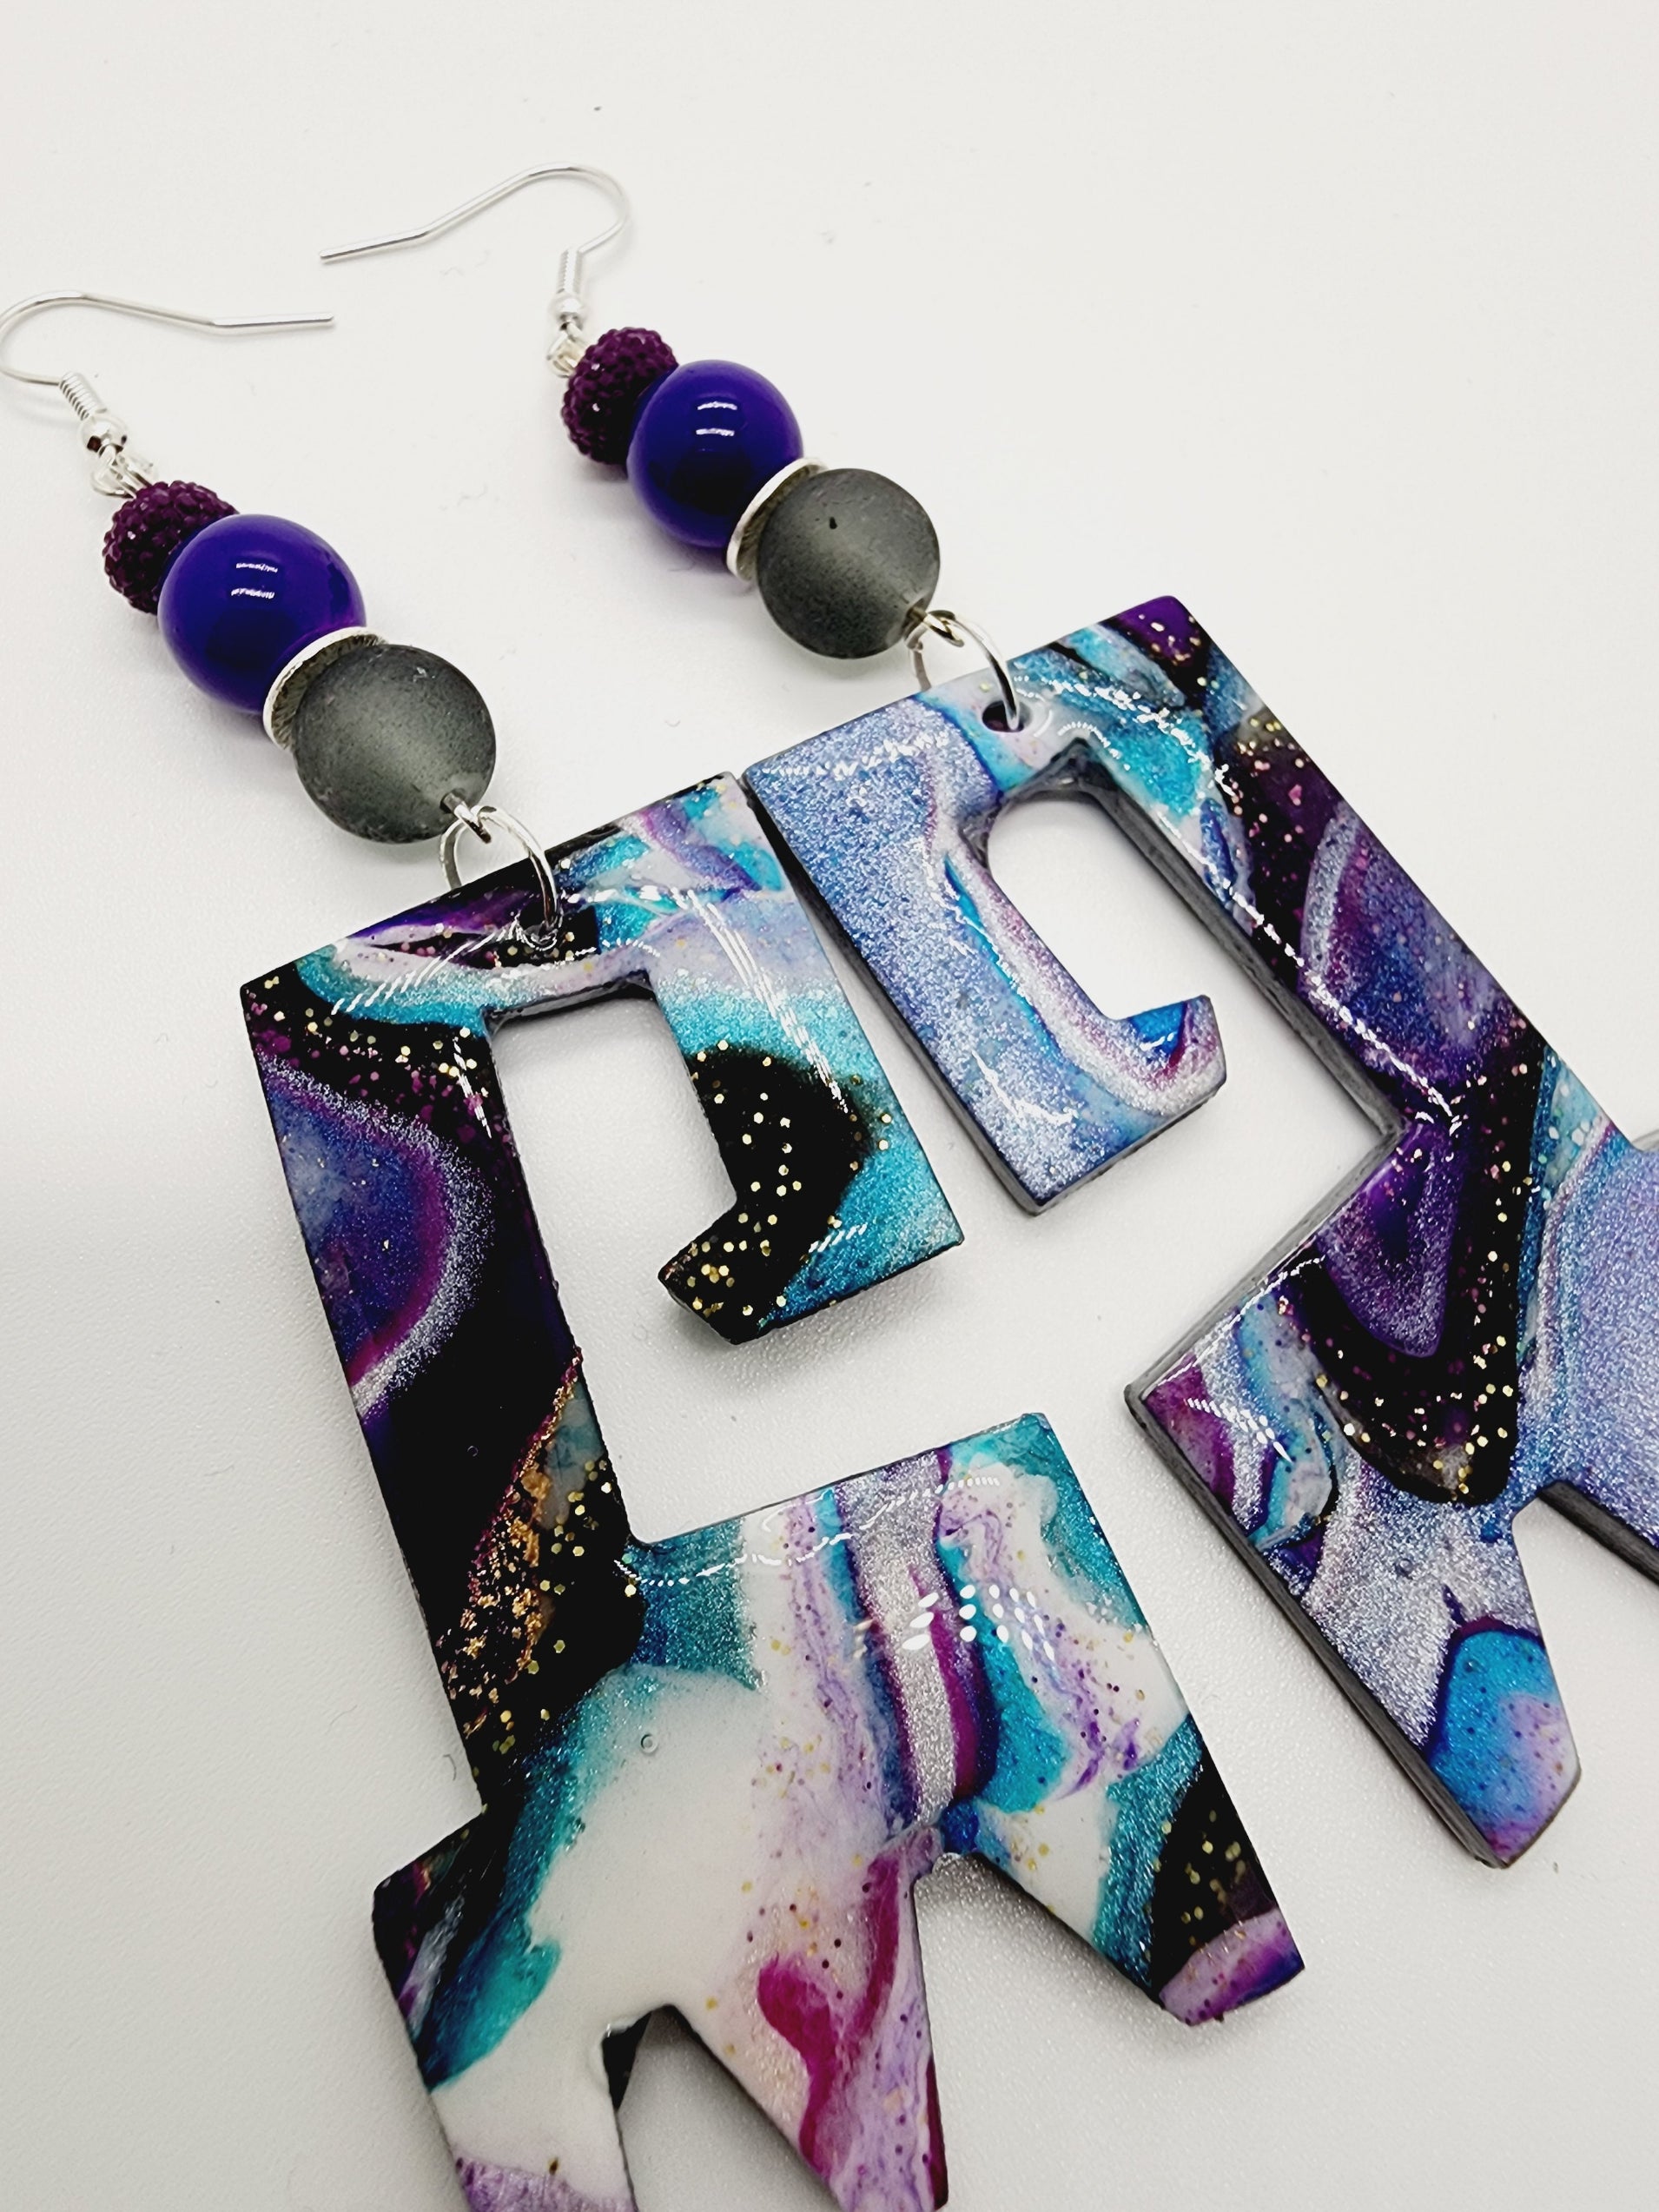 Length: 4.5 inches | Weight: 0.8 ounces   Distinctly You! These handmade earrings are made using purple and turquoise multi colored polymer clay, silver disc charm, purple rondelle spacers, and hypoallergenic hooks with back closures. 